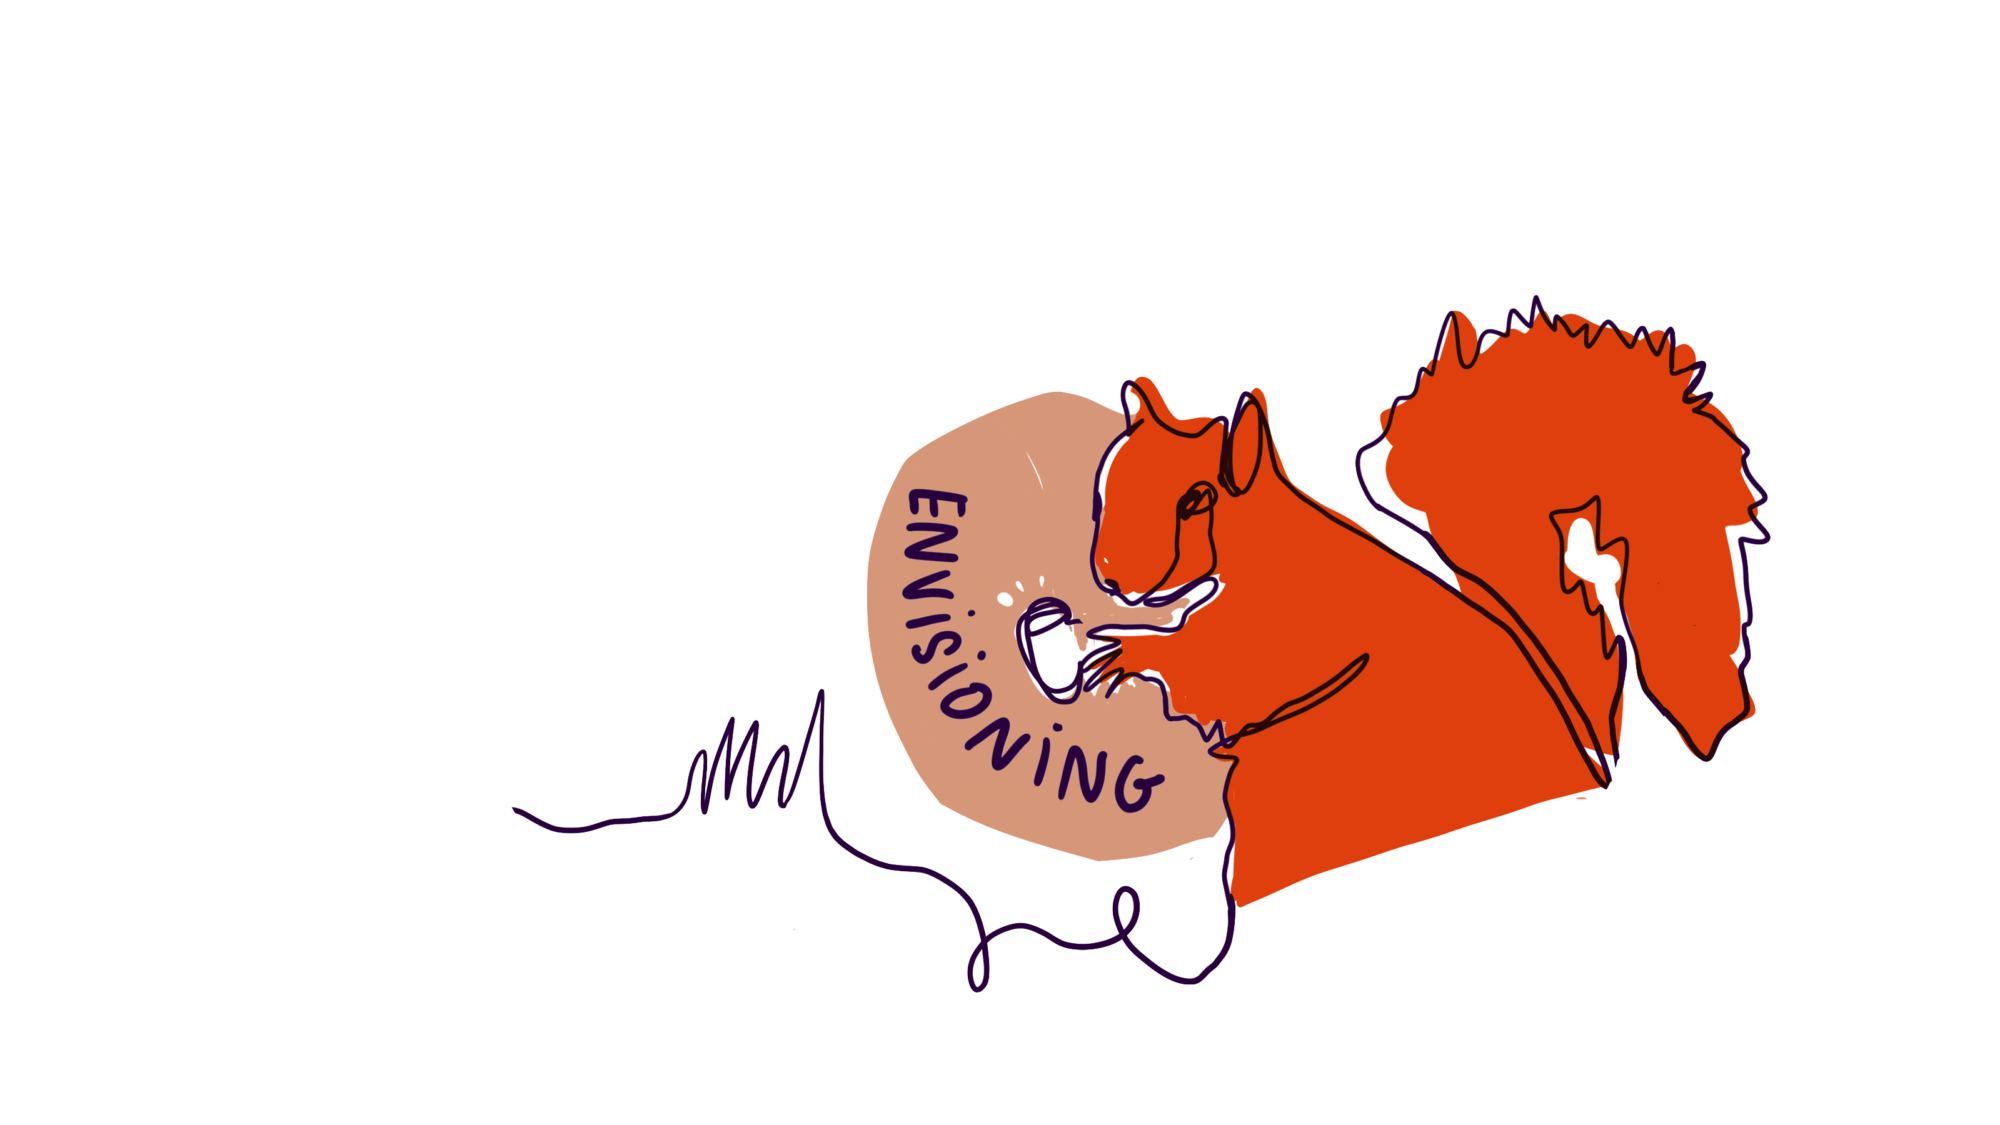 A one-line drawing of an orange squirrel and an icon that reads Envisioning.